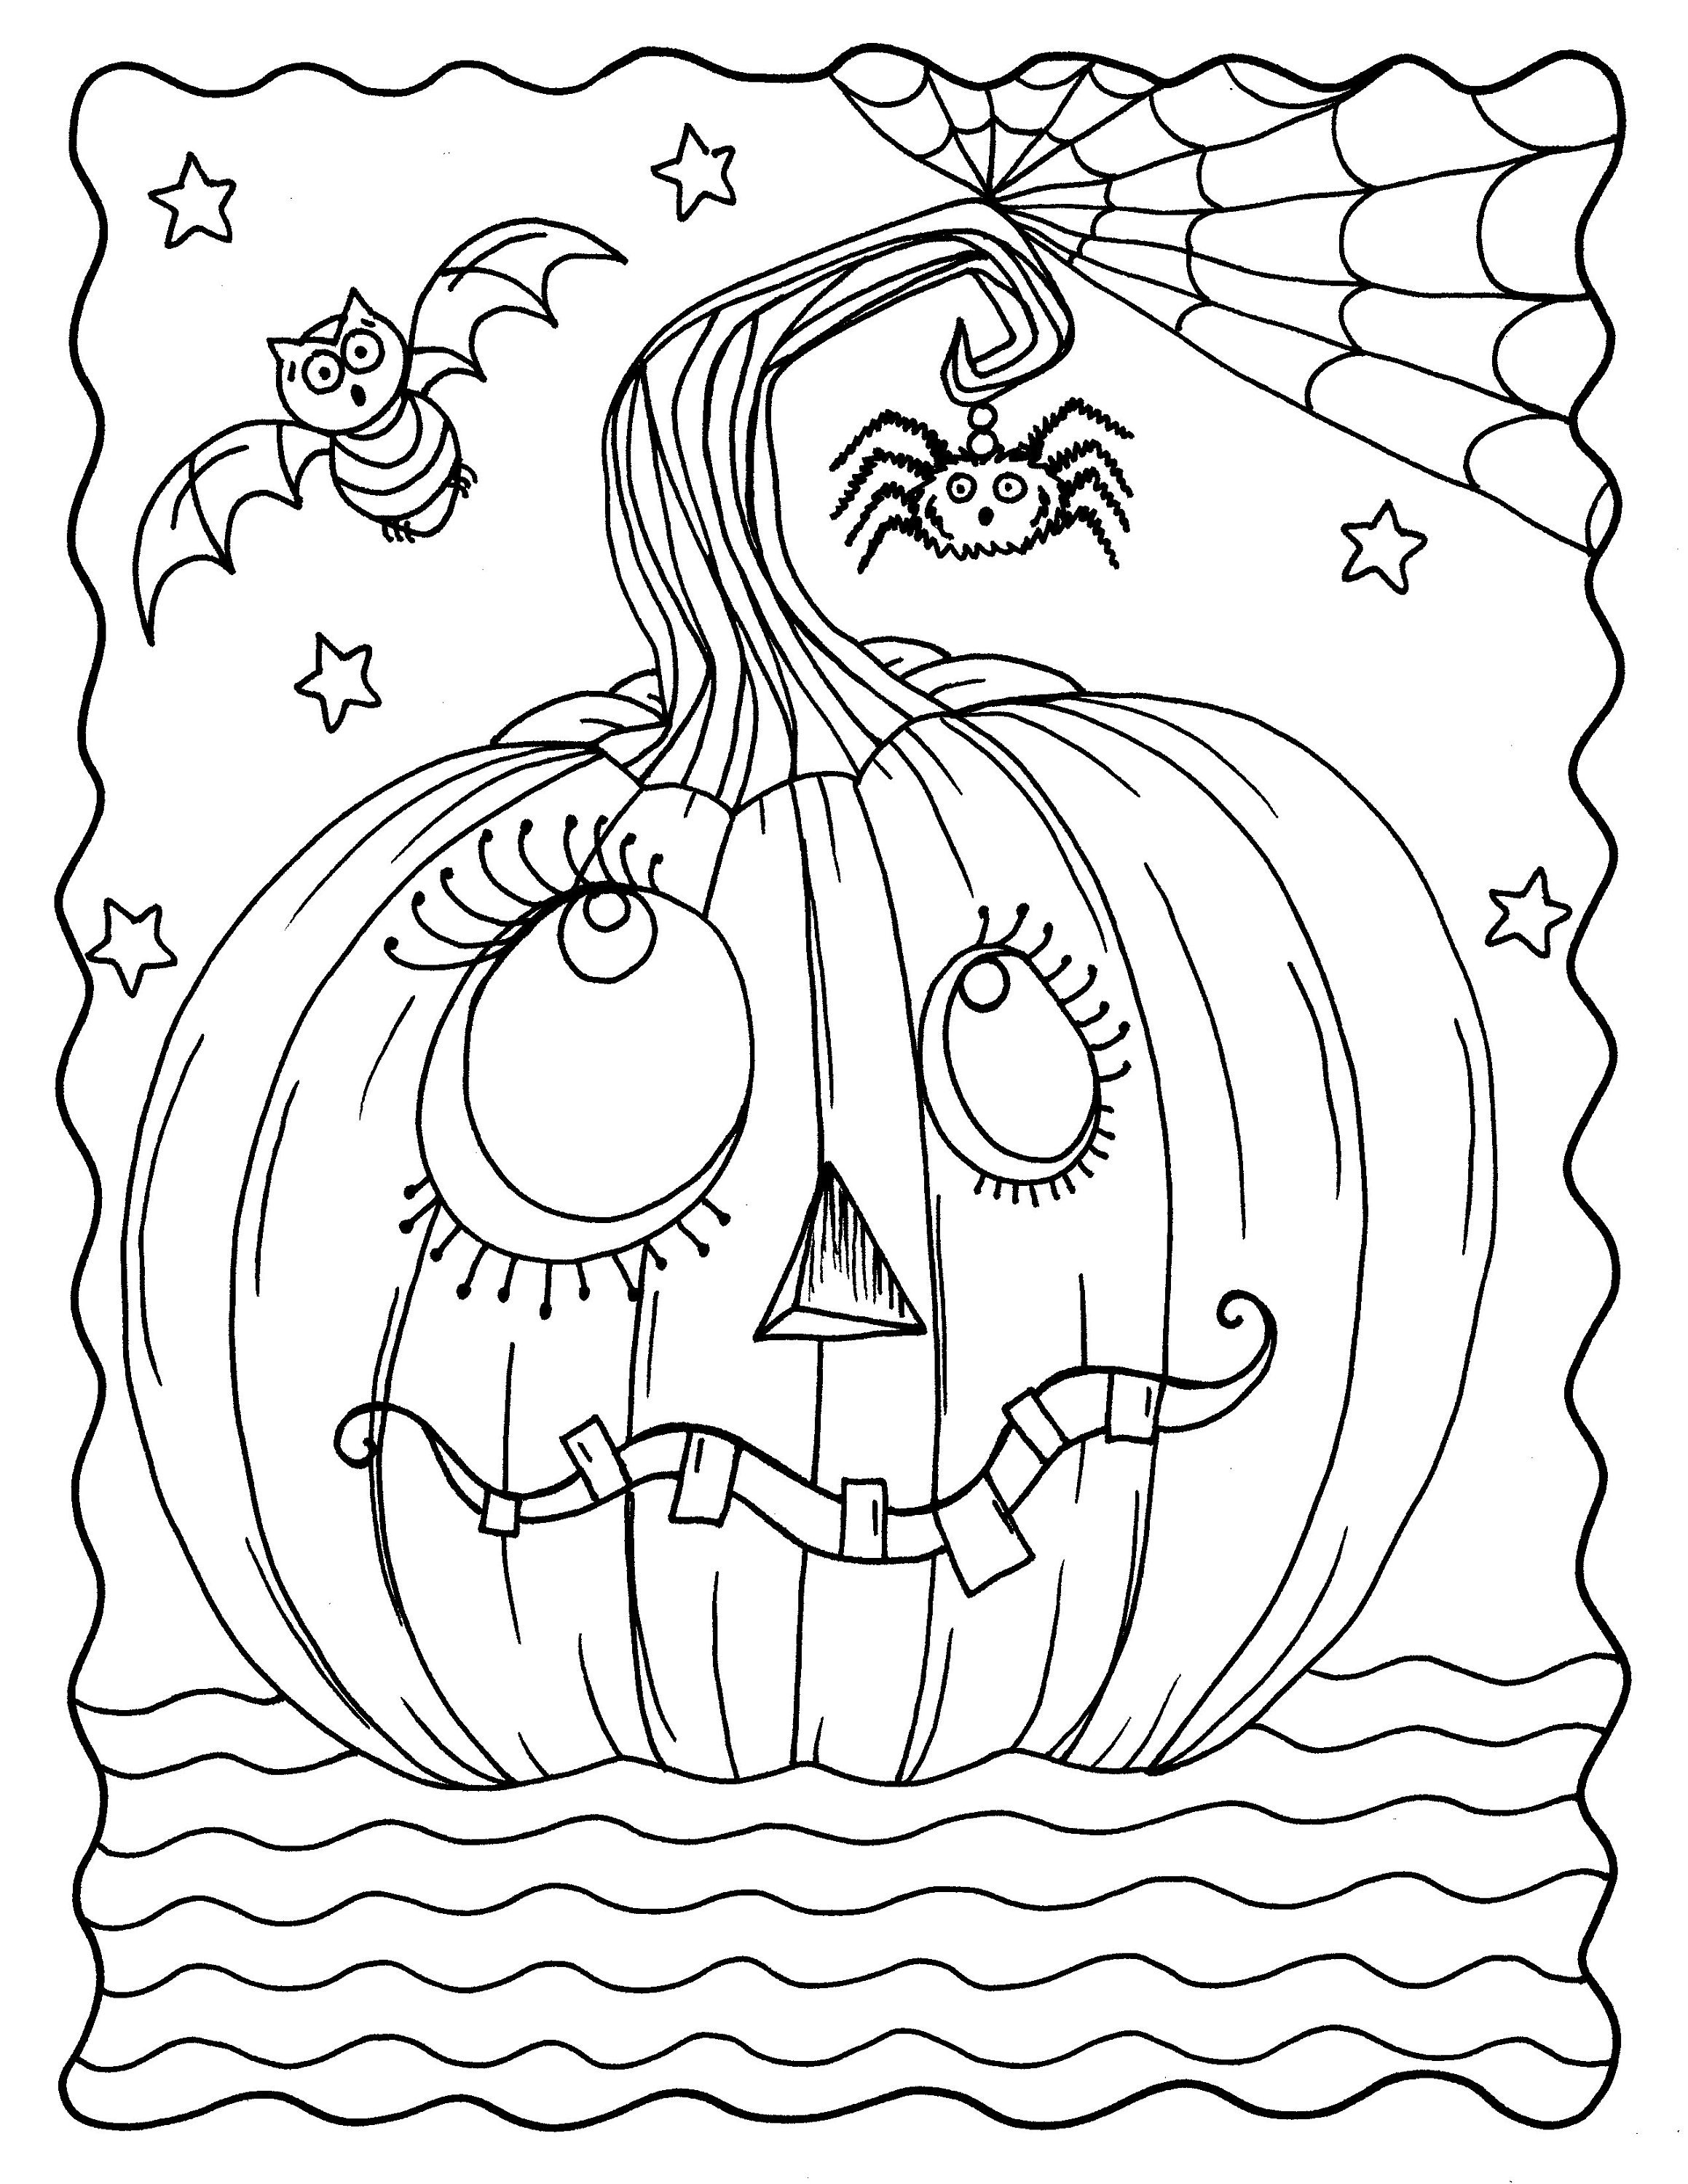 Goofy pumpkin coloring page digital download instant printable adult coloring pages halloween jack o lantern